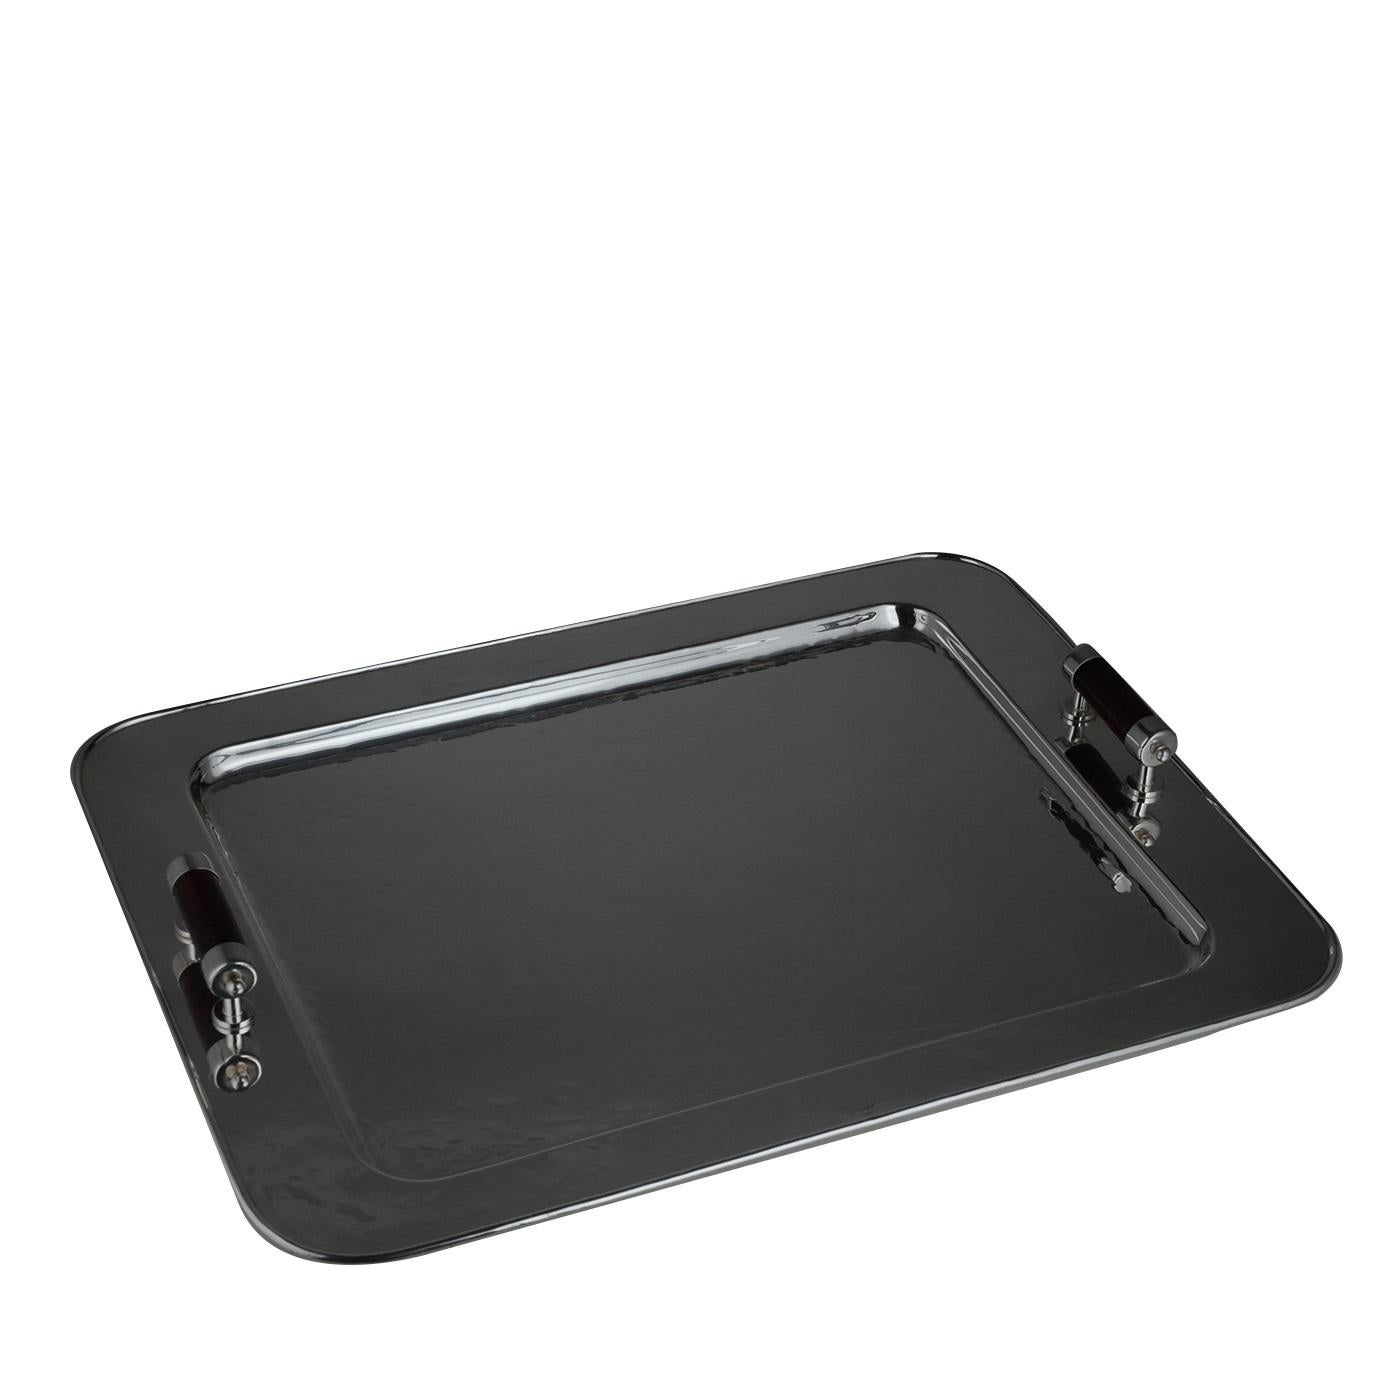 This elegant rectangular tray will be a sophisticated addition to a classically decorated home. Its generous size makes it a versatile object that can also be used as centerpiece. The rectangular Silhouette features round corners that add a gentle